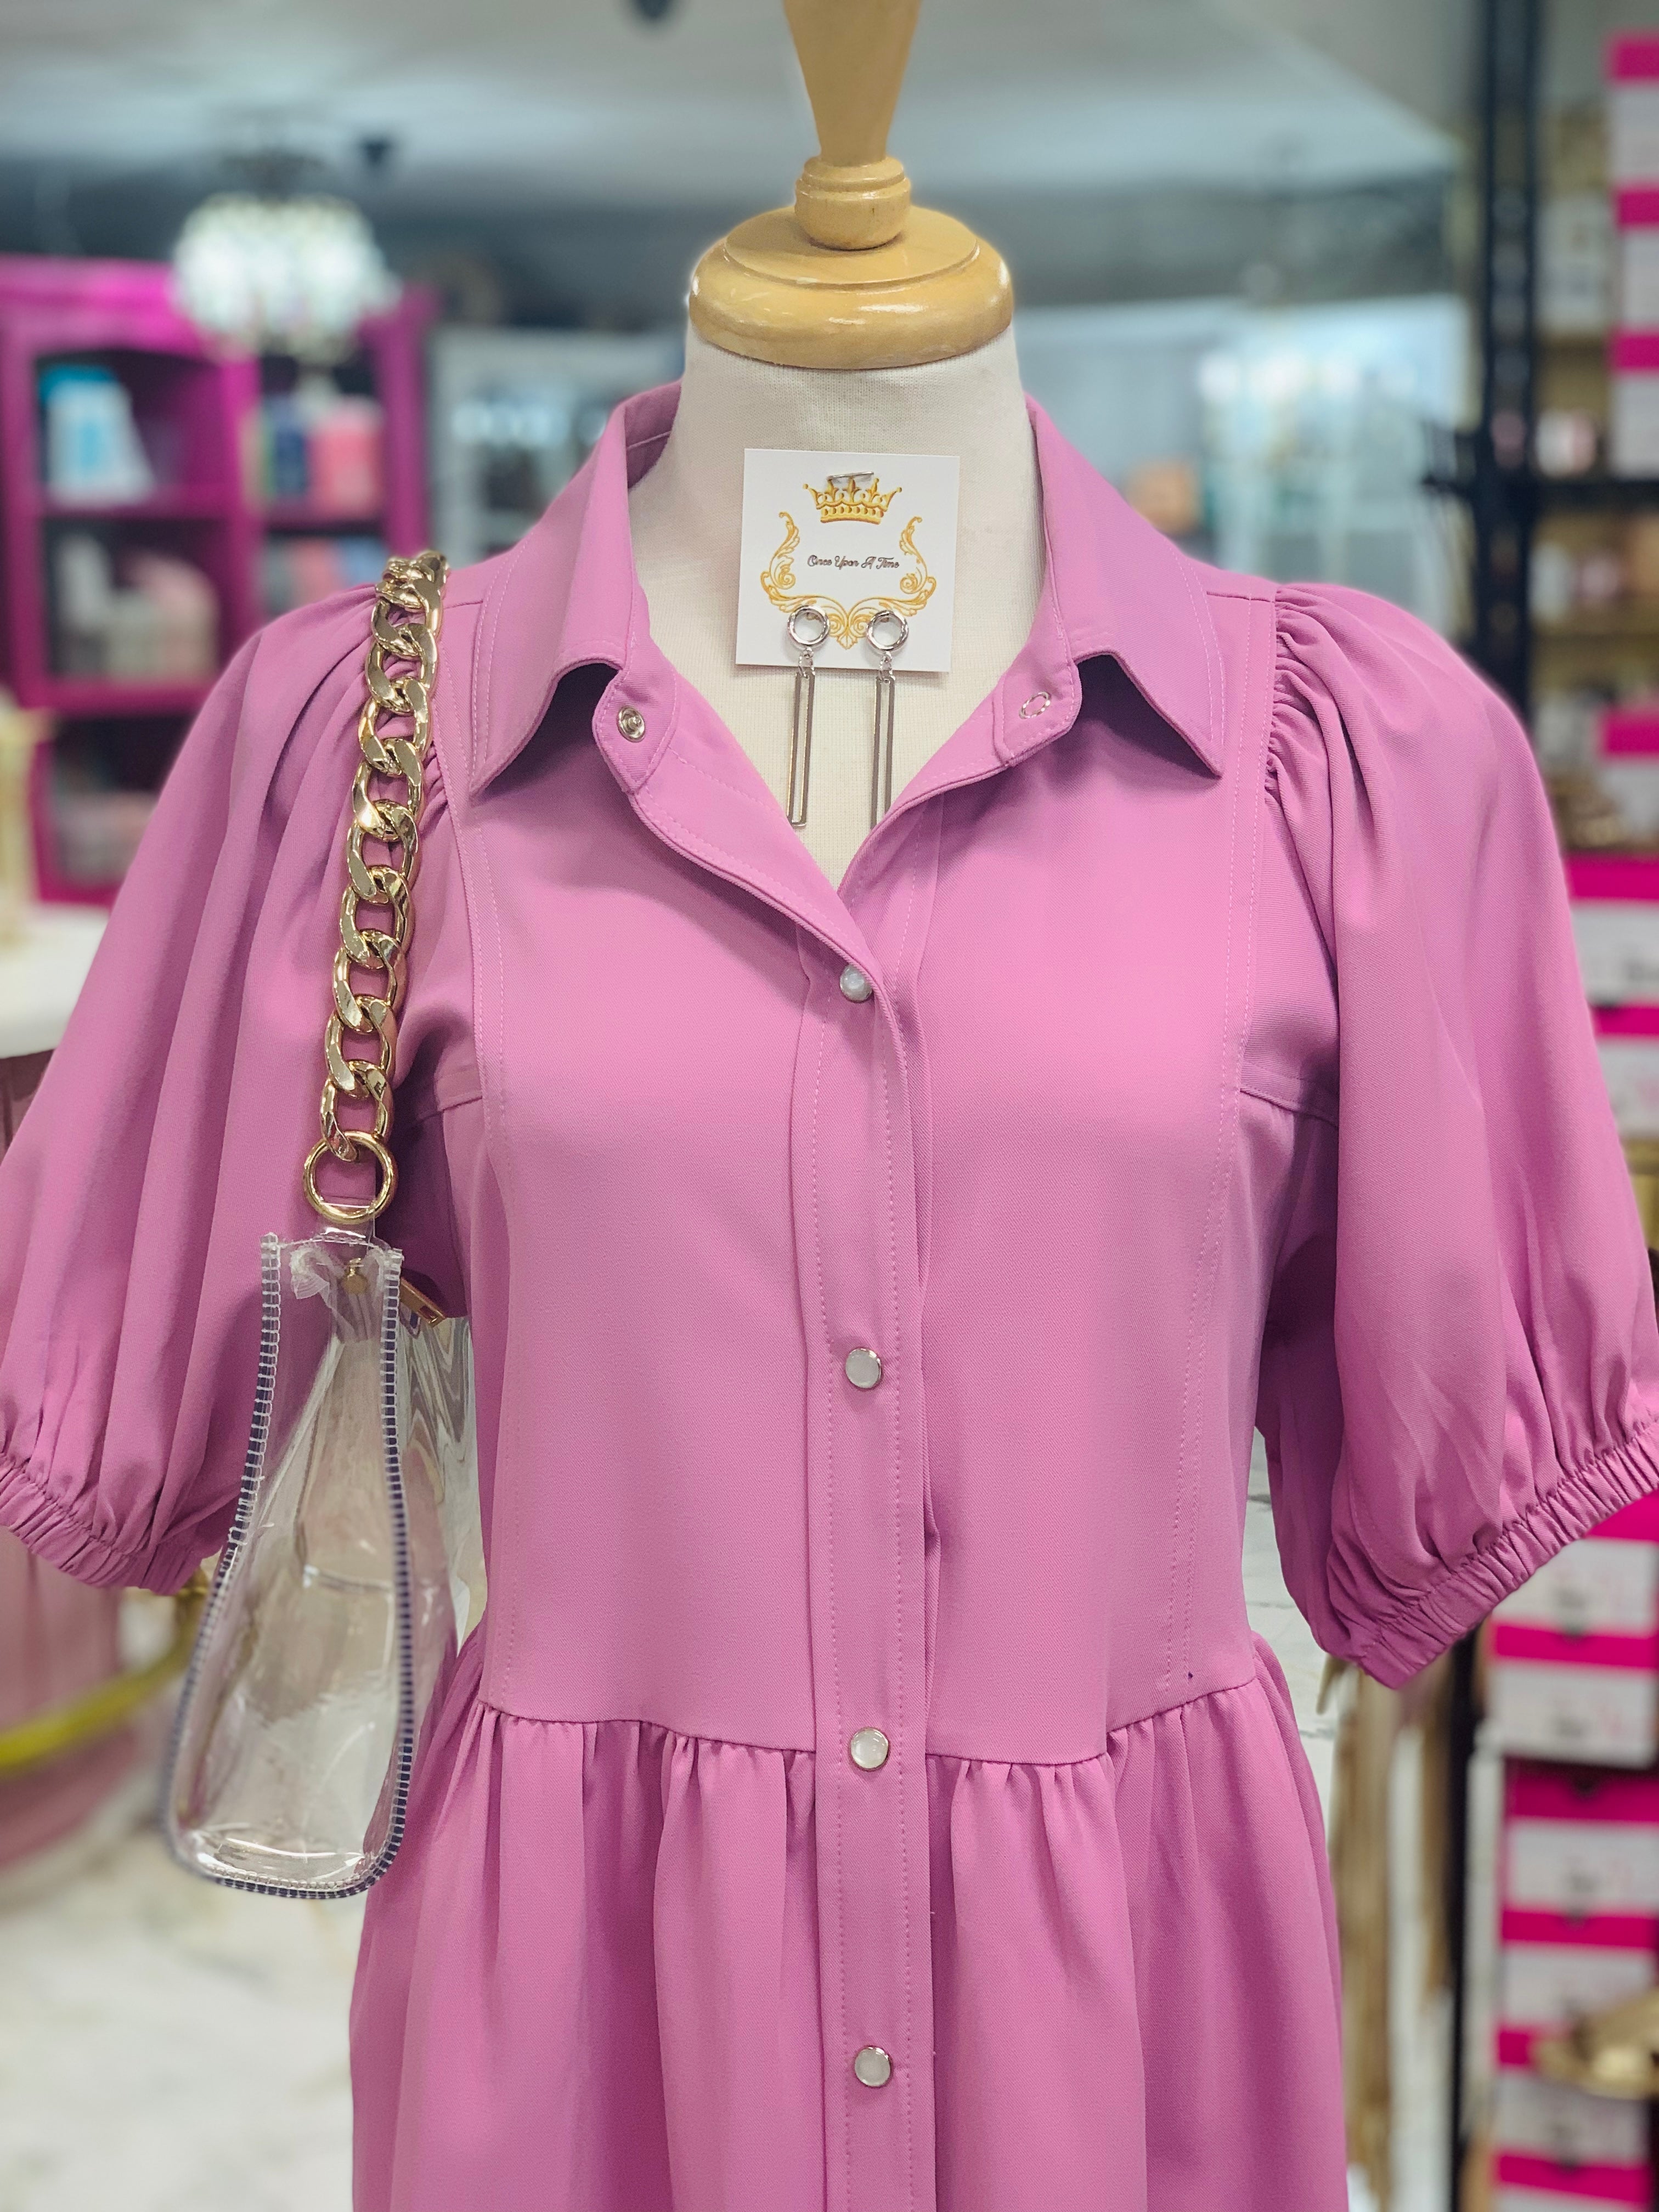 Donna Pink Collared Dress